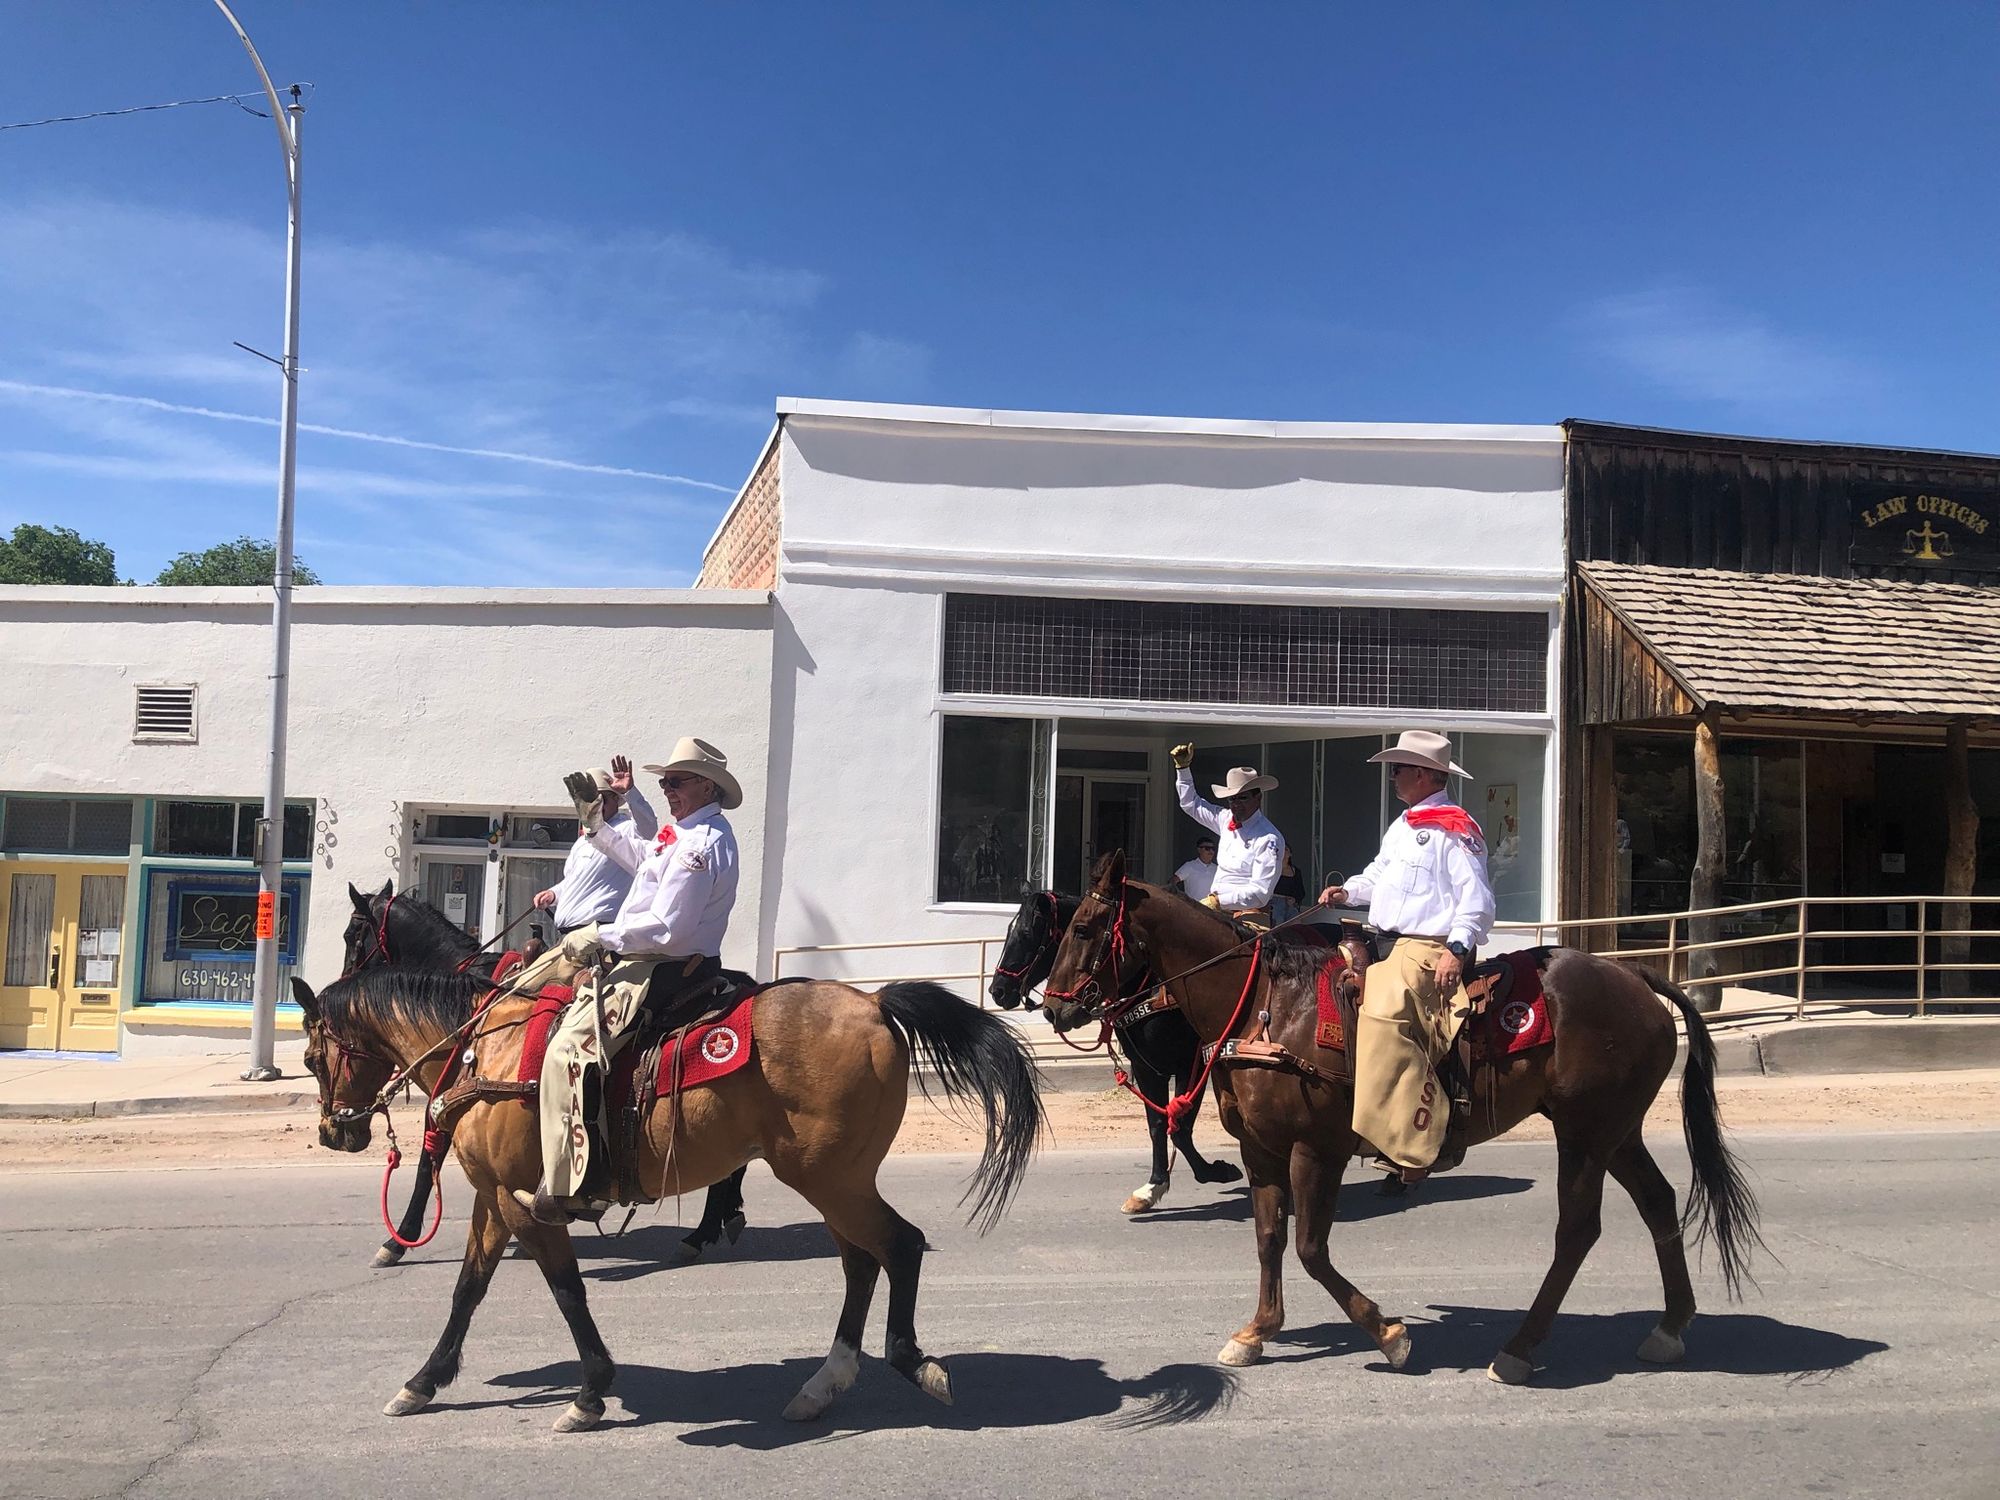 Four men ride horseback, in white shirts, chaps and white cowboy hats, down the Main Street of a small town on a blue sky day